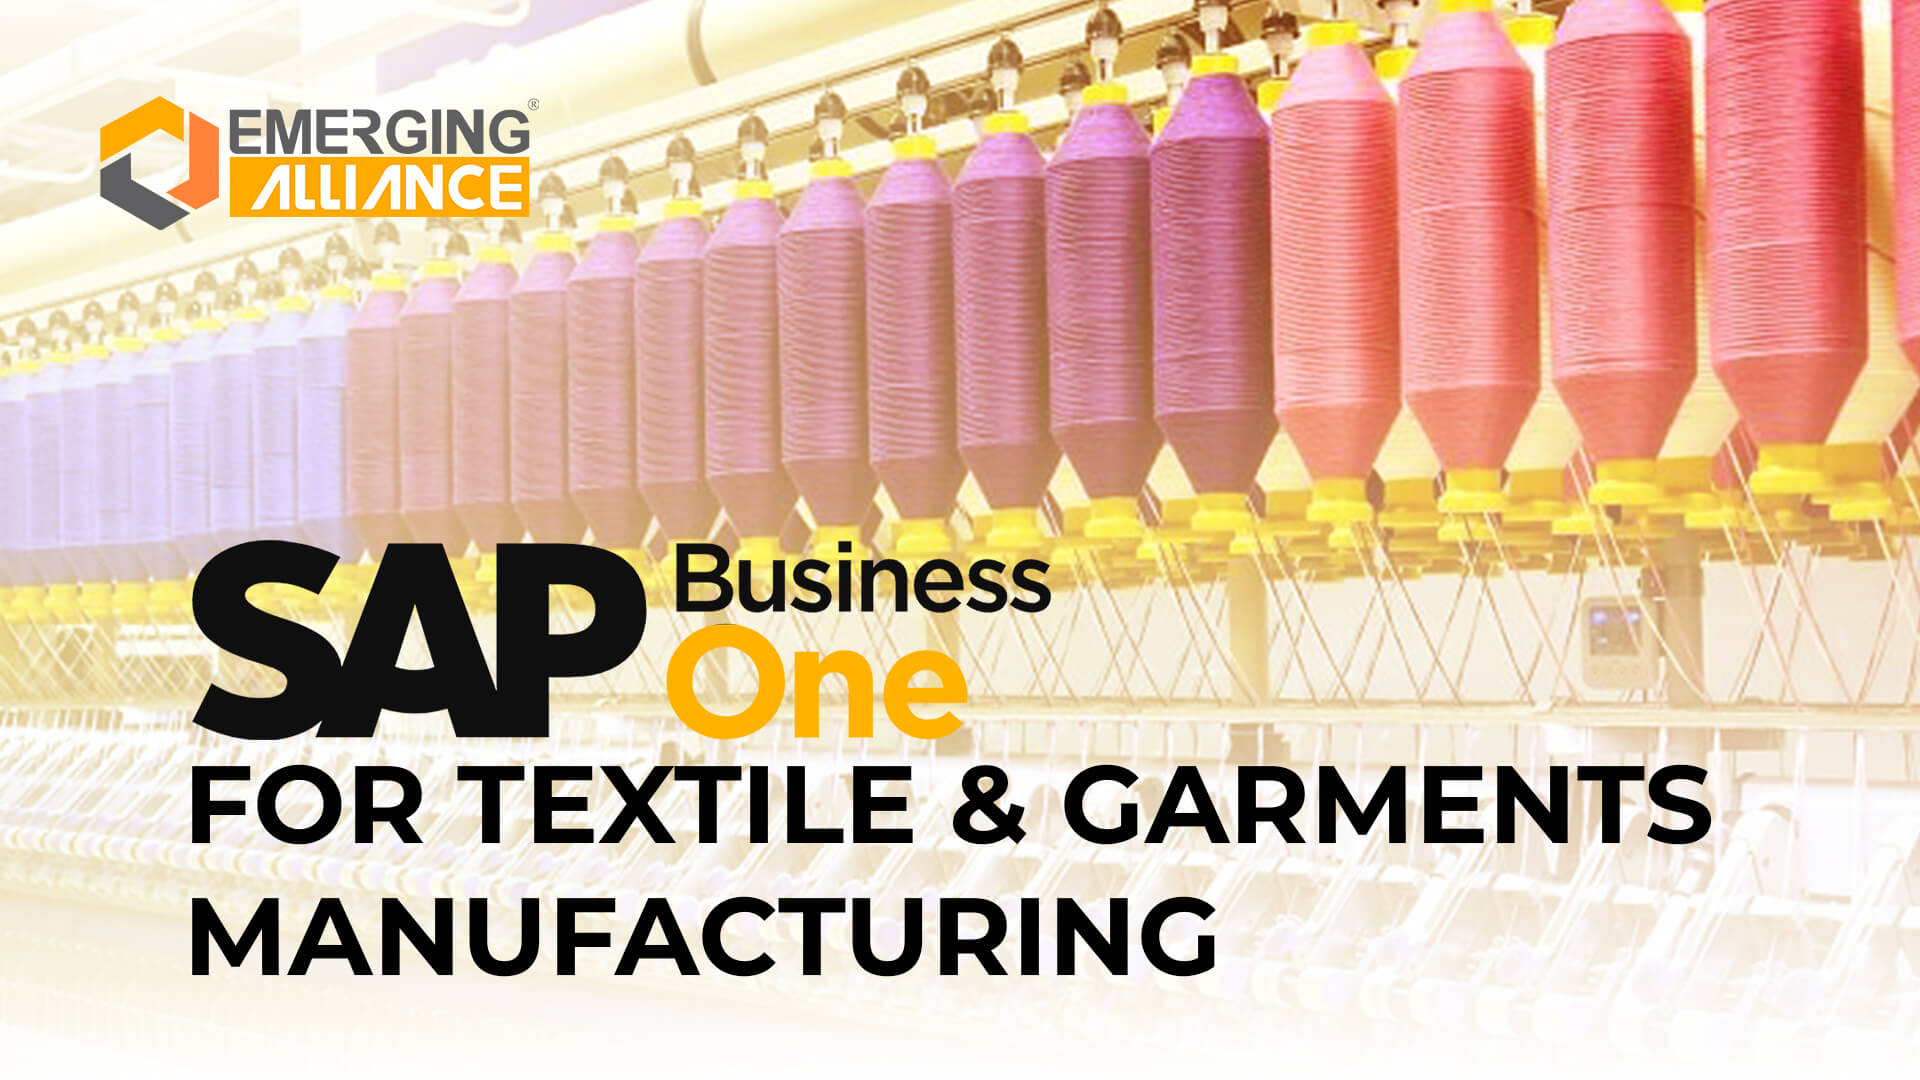 sap business one for Textile & Garments manufacturing